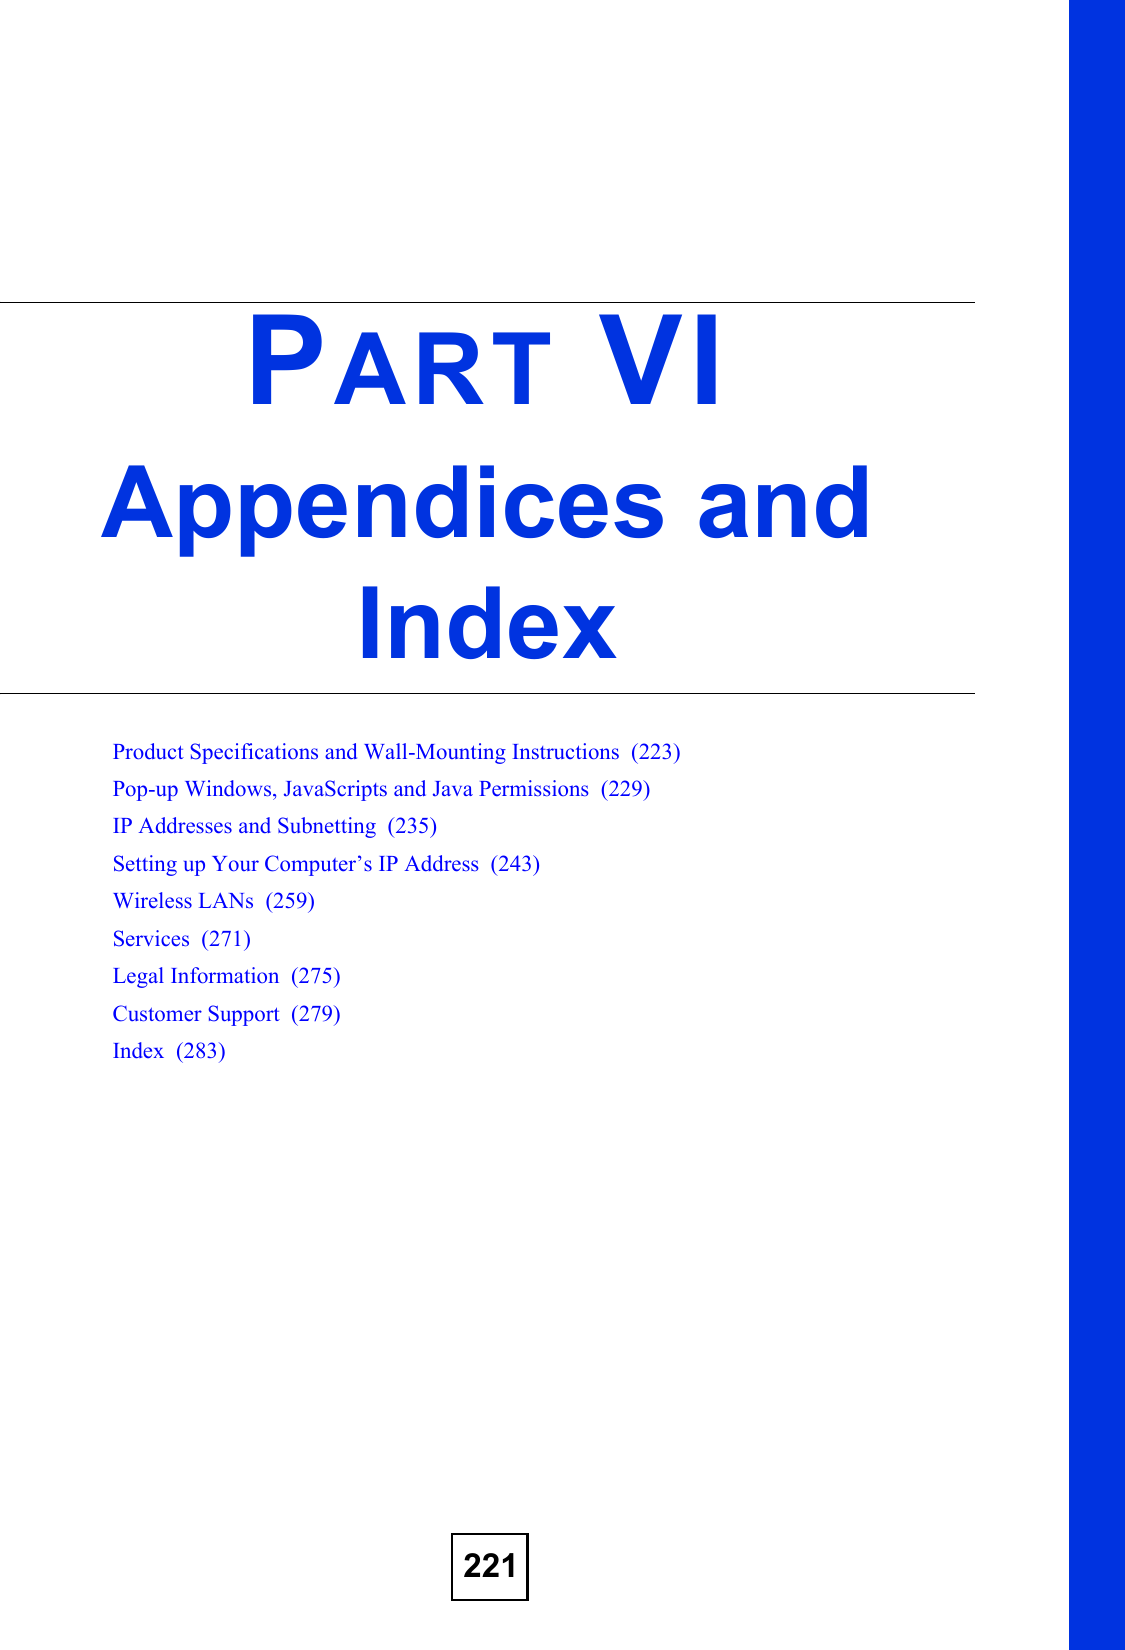 221PART VIAppendices and IndexProduct Specifications and Wall-Mounting Instructions  (223)Pop-up Windows, JavaScripts and Java Permissions  (229)IP Addresses and Subnetting  (235)Setting up Your Computer’s IP Address  (243)Wireless LANs  (259)Services  (271)Legal Information  (275)Customer Support  (279)Index  (283)